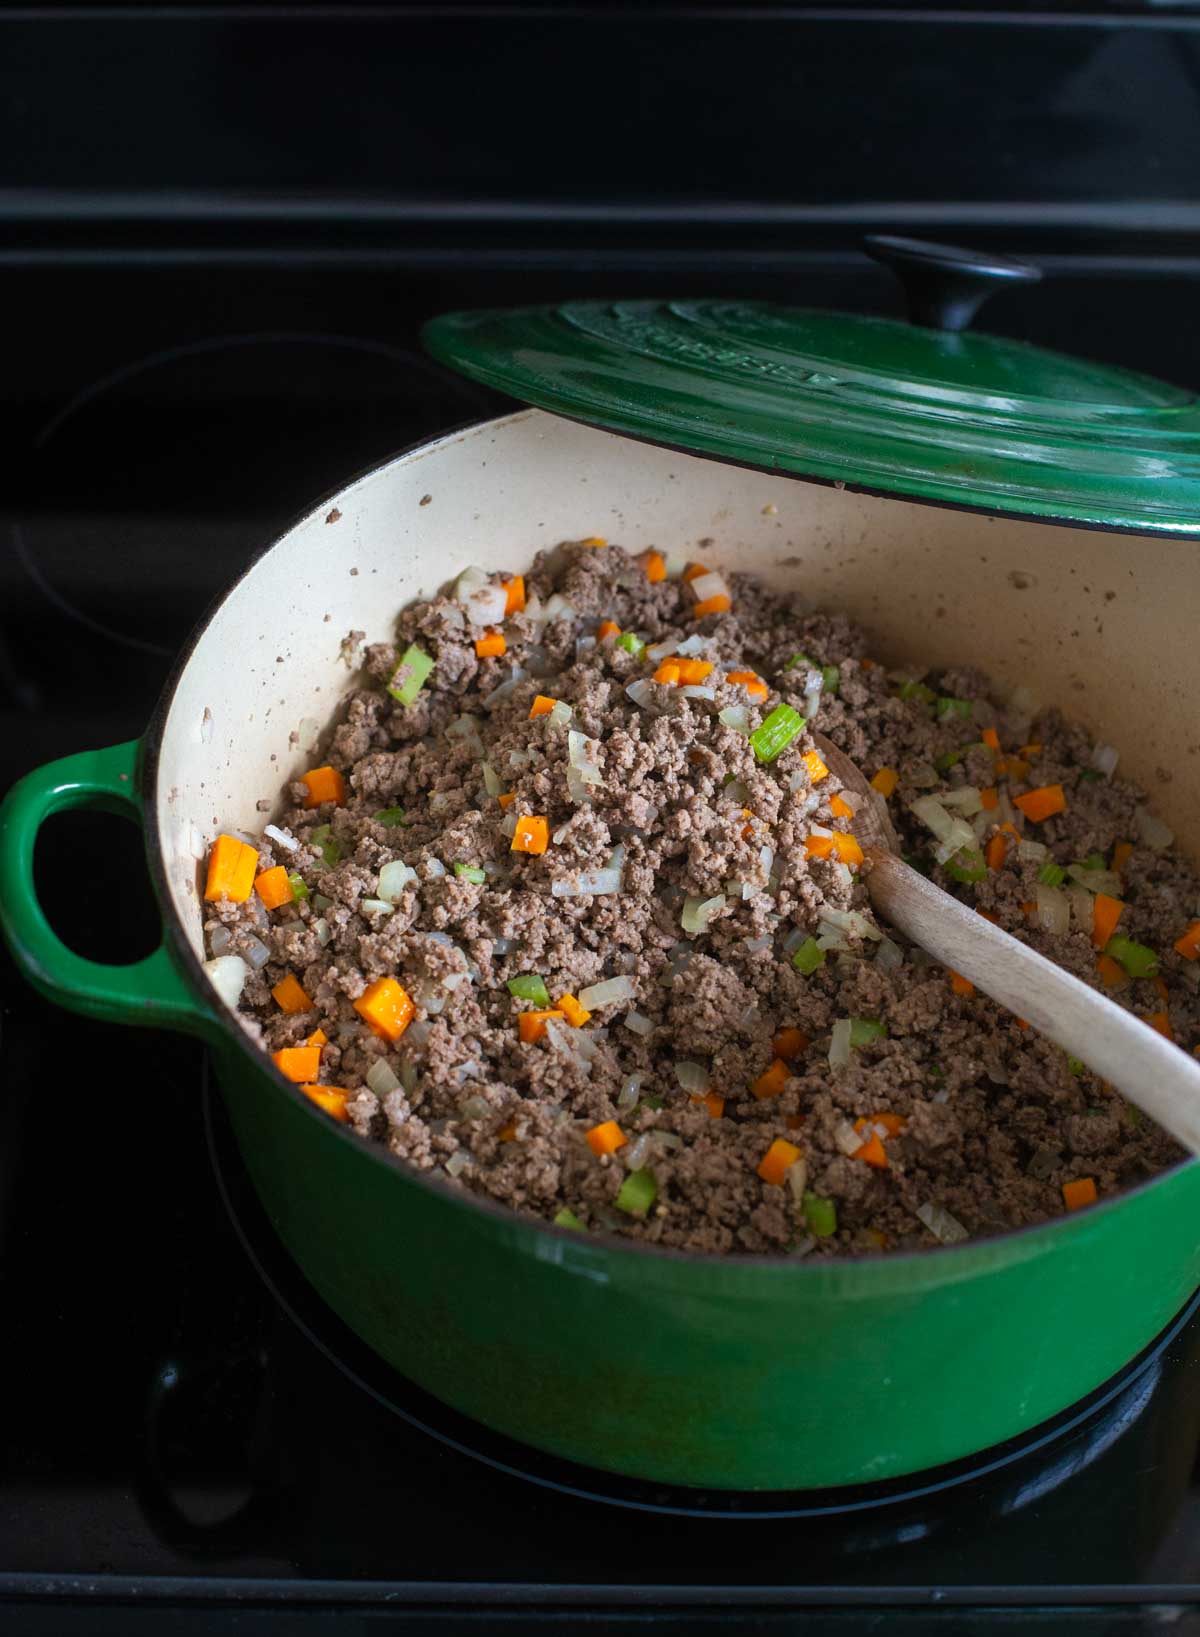 The ground beef is cooking in a green Dutch oven on the stovetop.